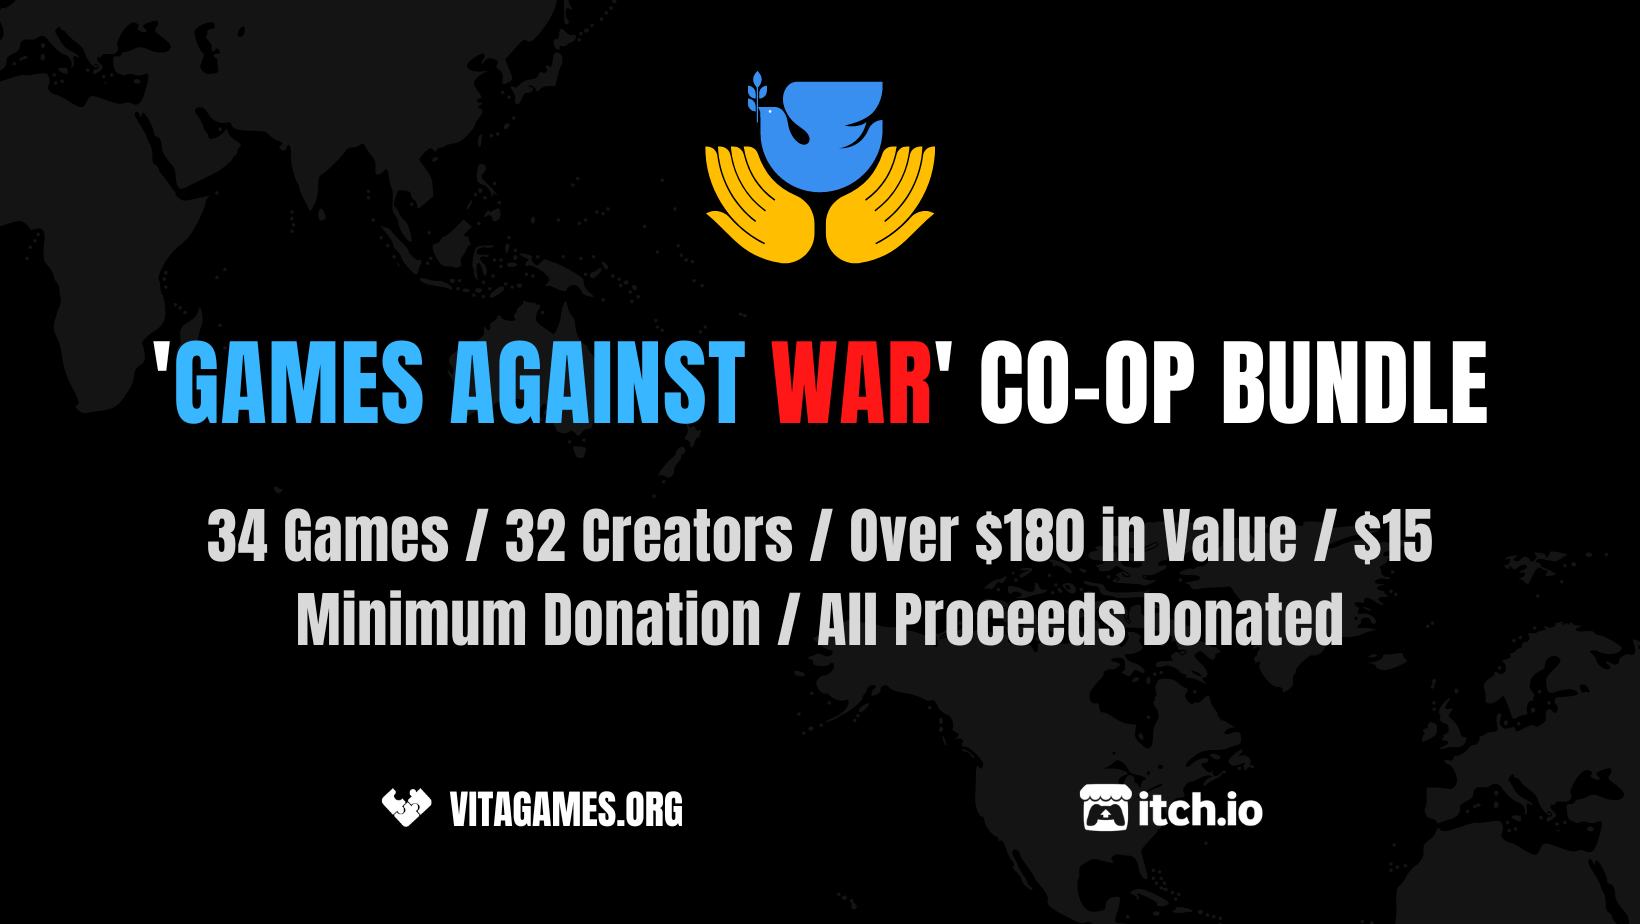 34 games for $15 donation at itch.io's 'Games Against War' charity bundle.